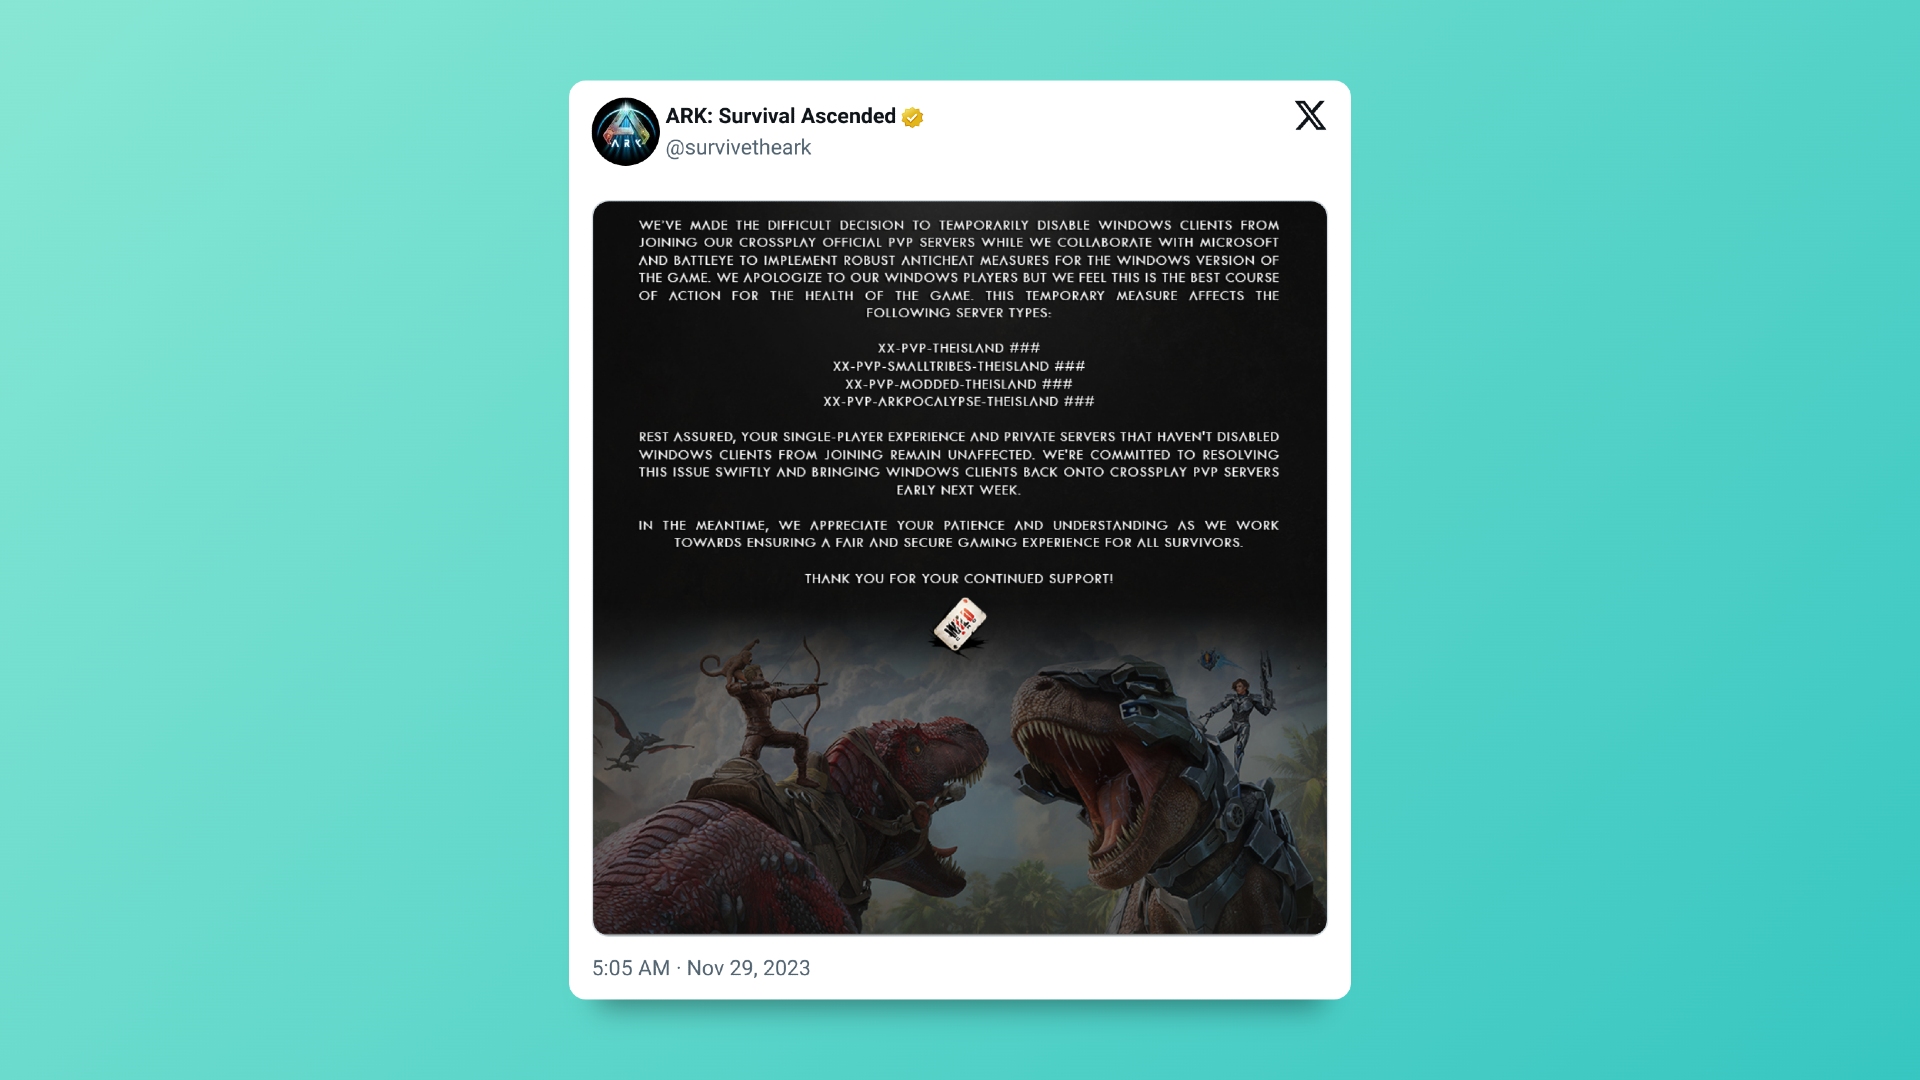 Ark Survival Ascended tweet from developers explaining the crossplay removal on PC